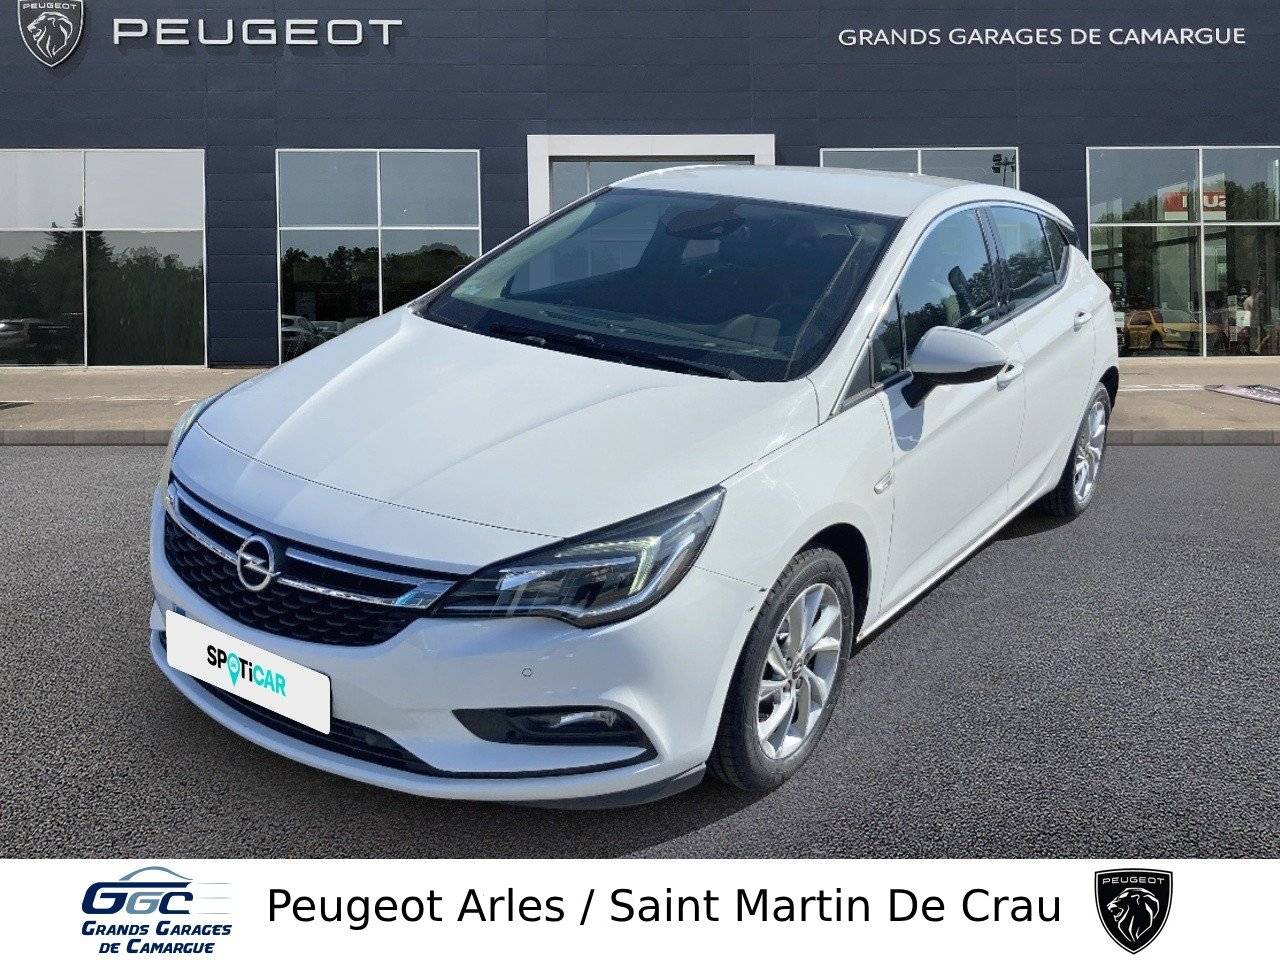 OPEL ASTRA | Astra 1.4 Turbo 150 ch Start/Stop BVA6 occasion - Peugeot Arles